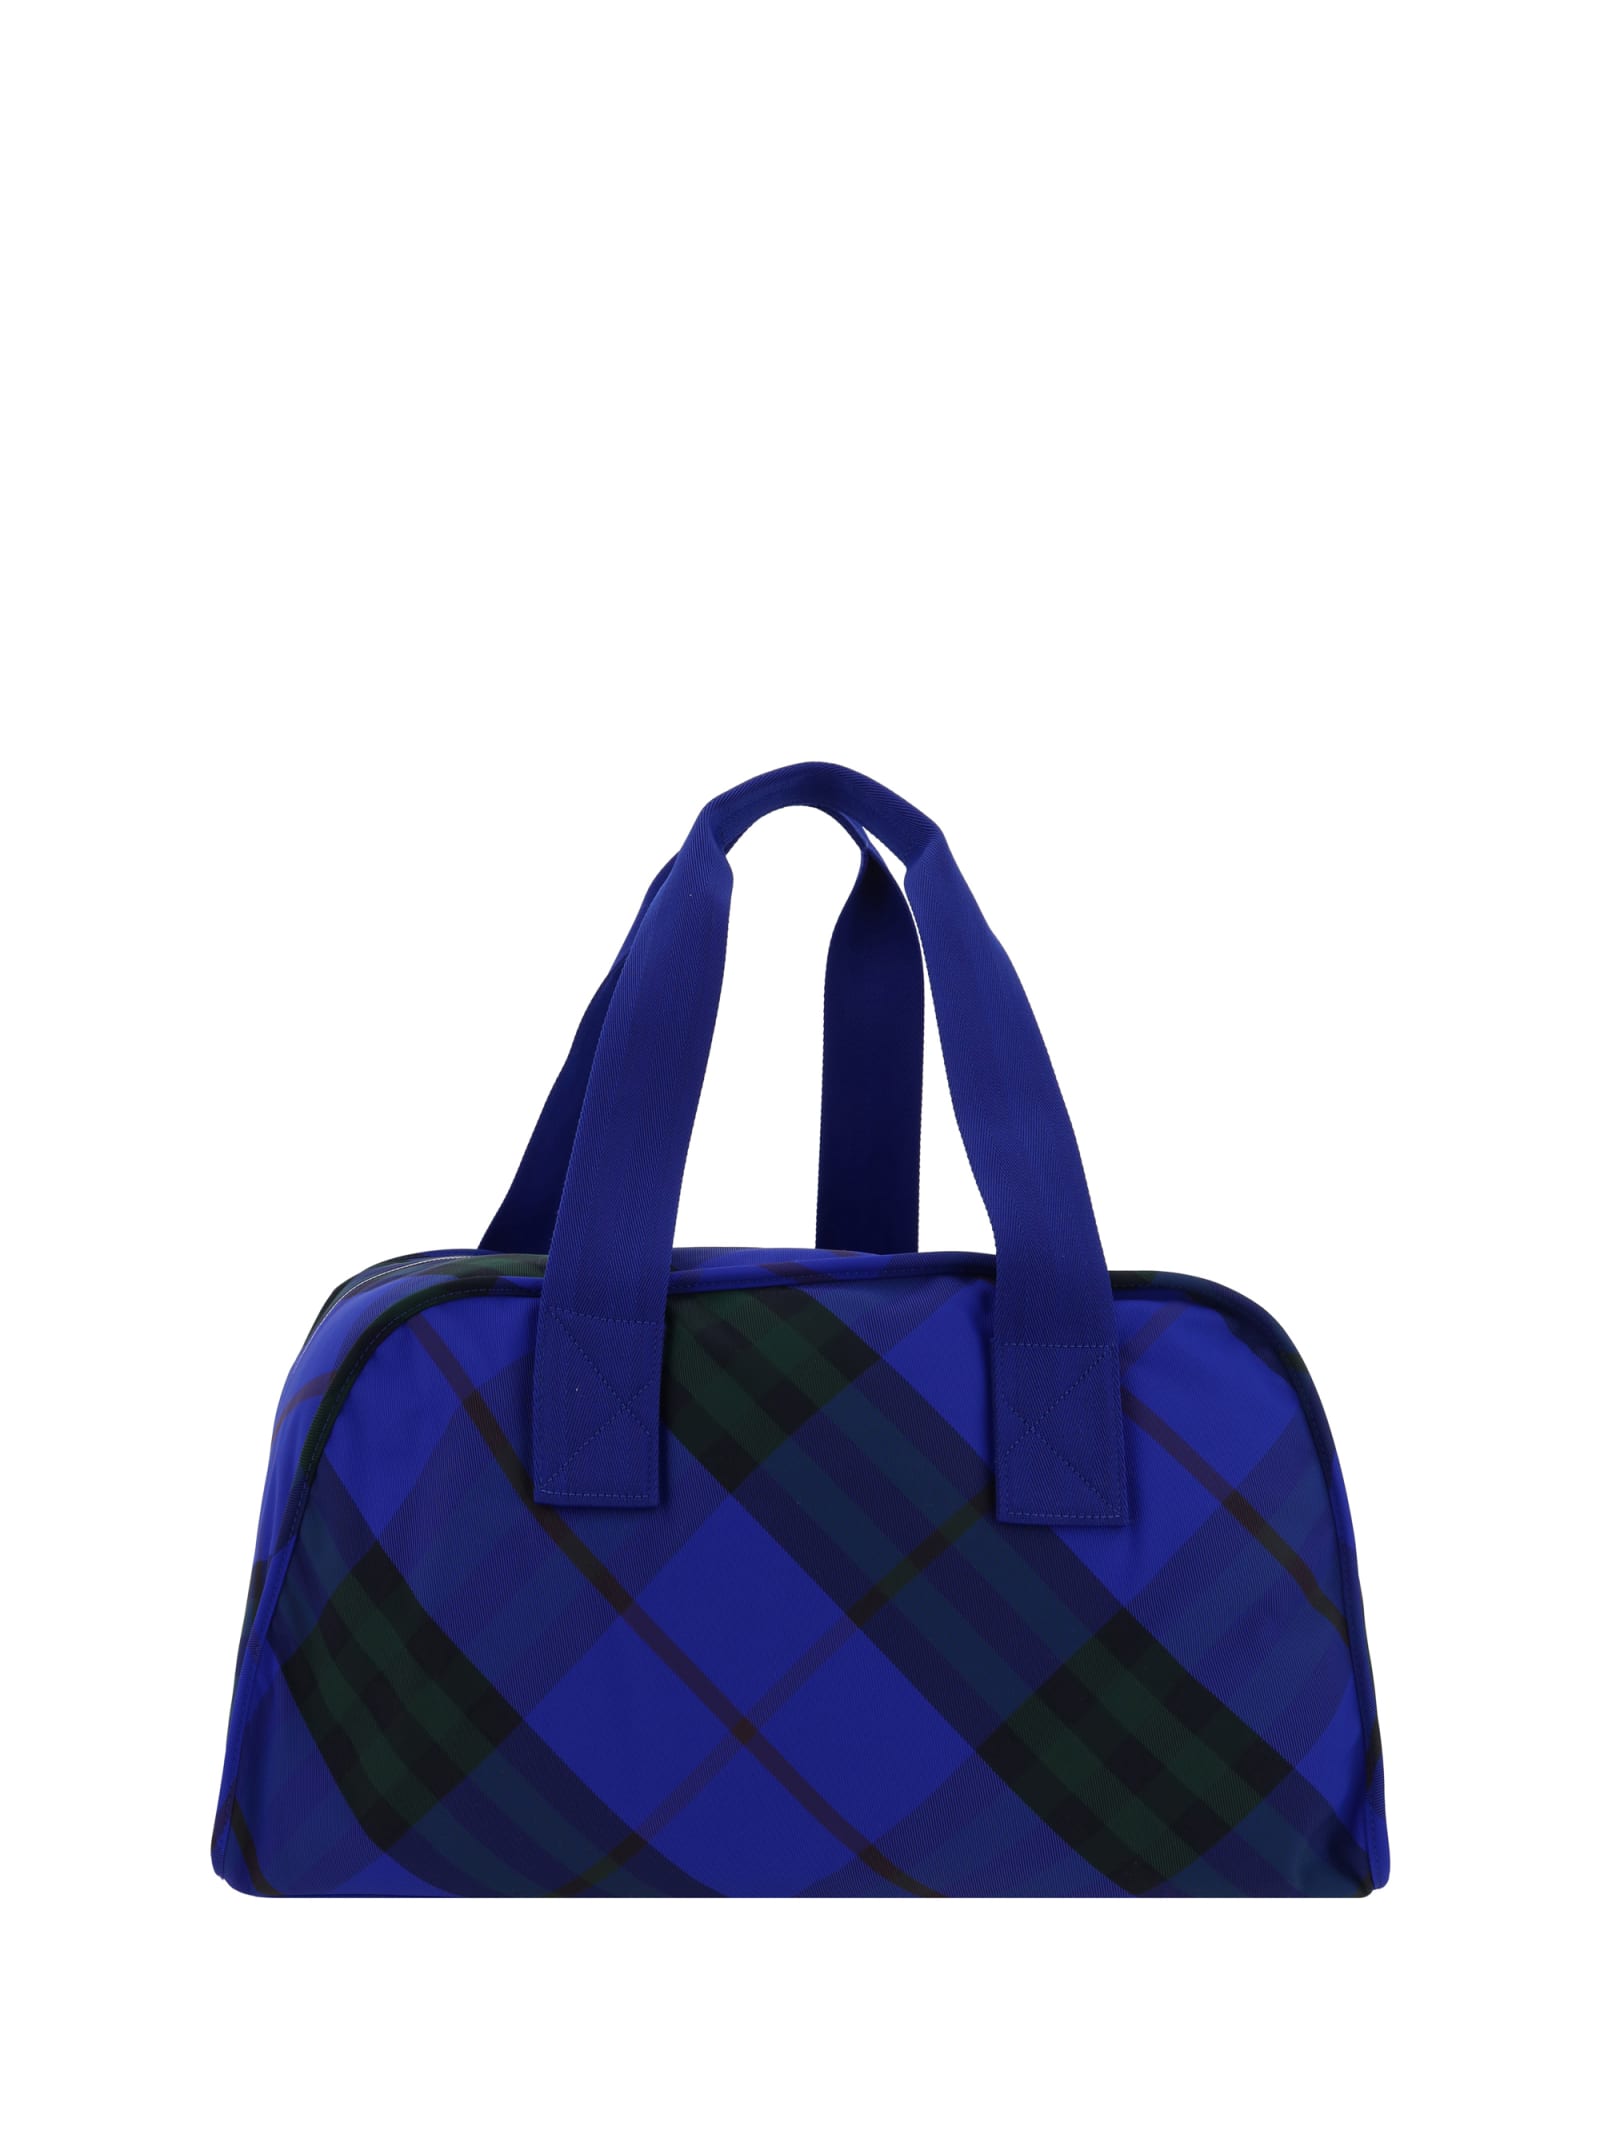 Shop Burberry Holdall Travel Bag In Knight